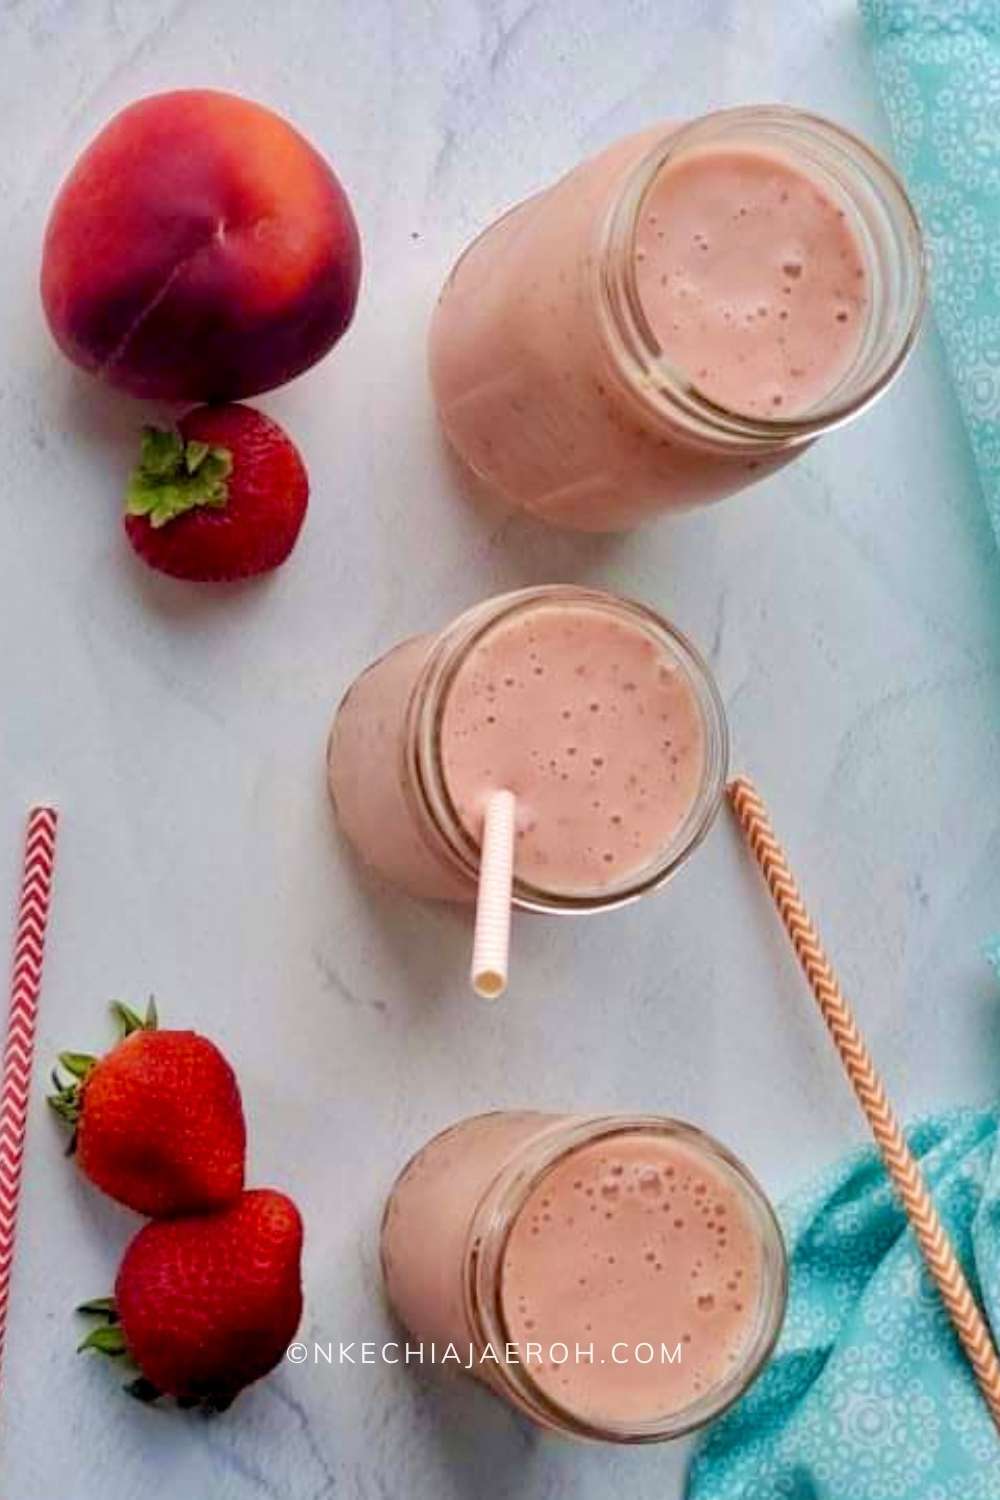 Healthy peach and strawberry smoothie is super easy to make, tasty, and refreshing! This nourishing breakfast smoothie is made with only five ingredients - frozen peaches, frozen strawberry, frozen, yogurt and orange juice! Though this is a vegetarian smoothie recipe, you can easily make it vegan by substituting Greek yogurt with a dairy-free yogurt. #Smoothies #breakfastsmoothie #healthysmoothie #peachsmoothie #strawberrysmoothie